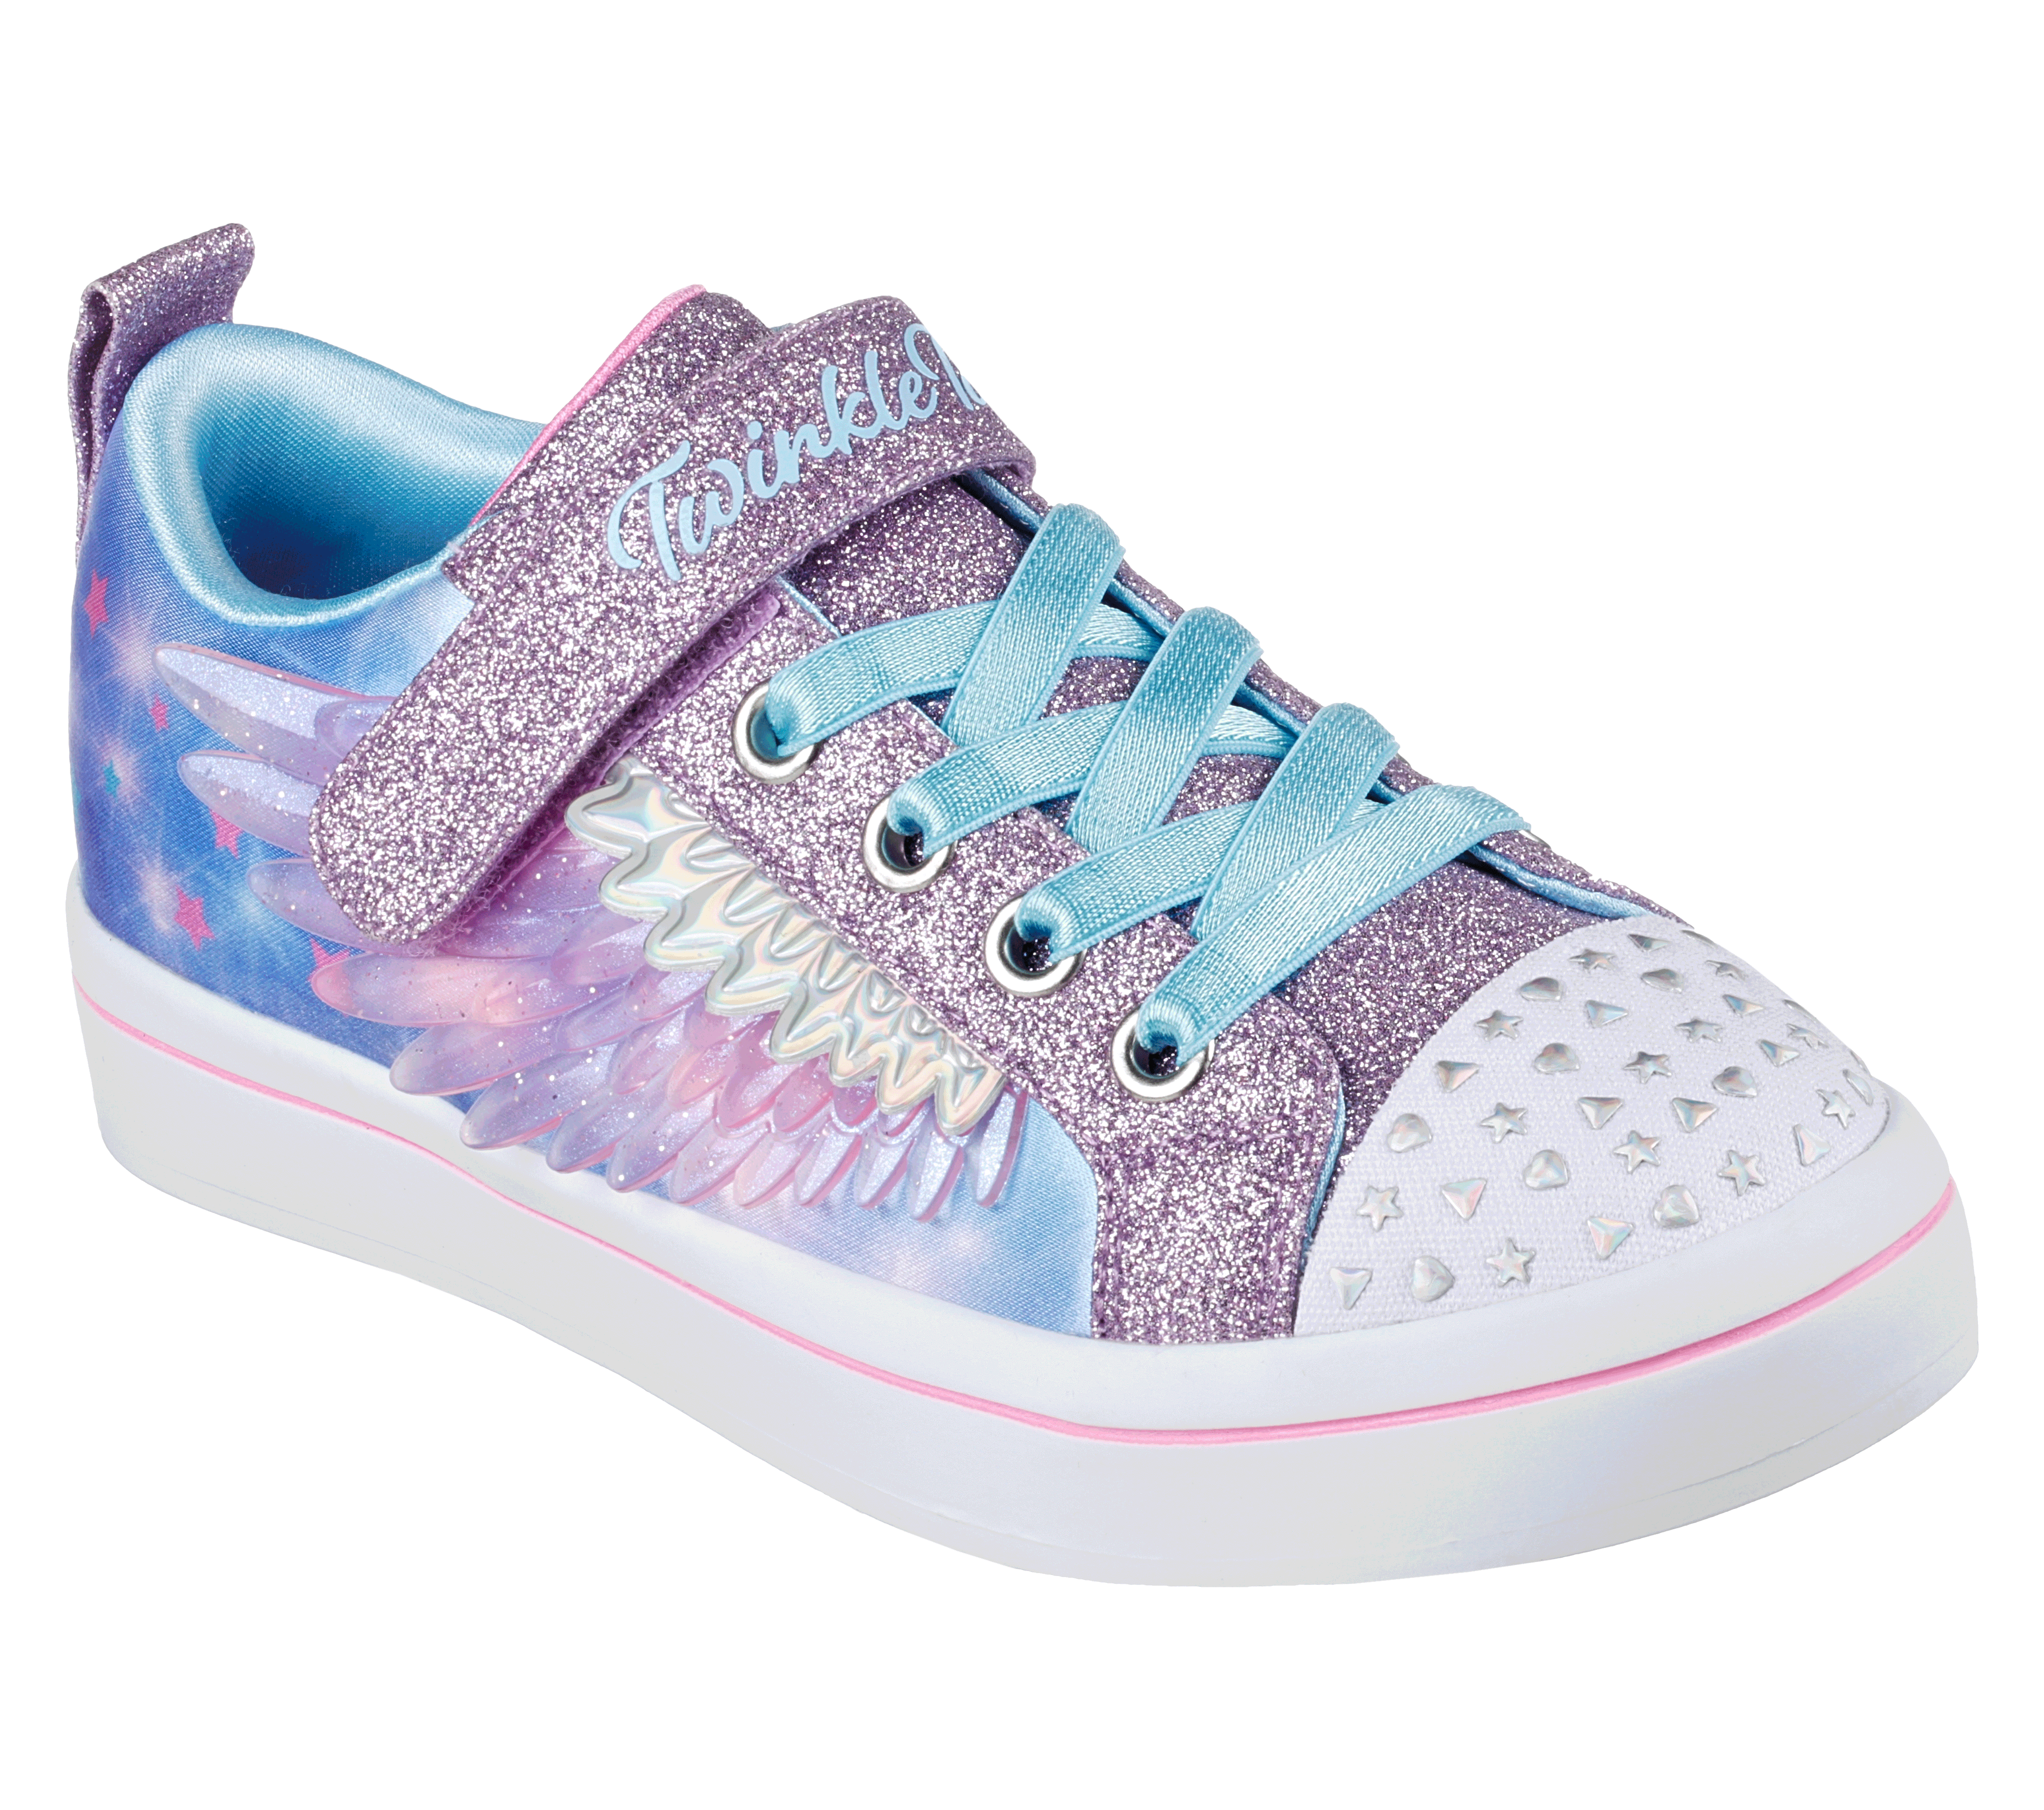 Shop the Twinkle Toes: Twi-Lites 